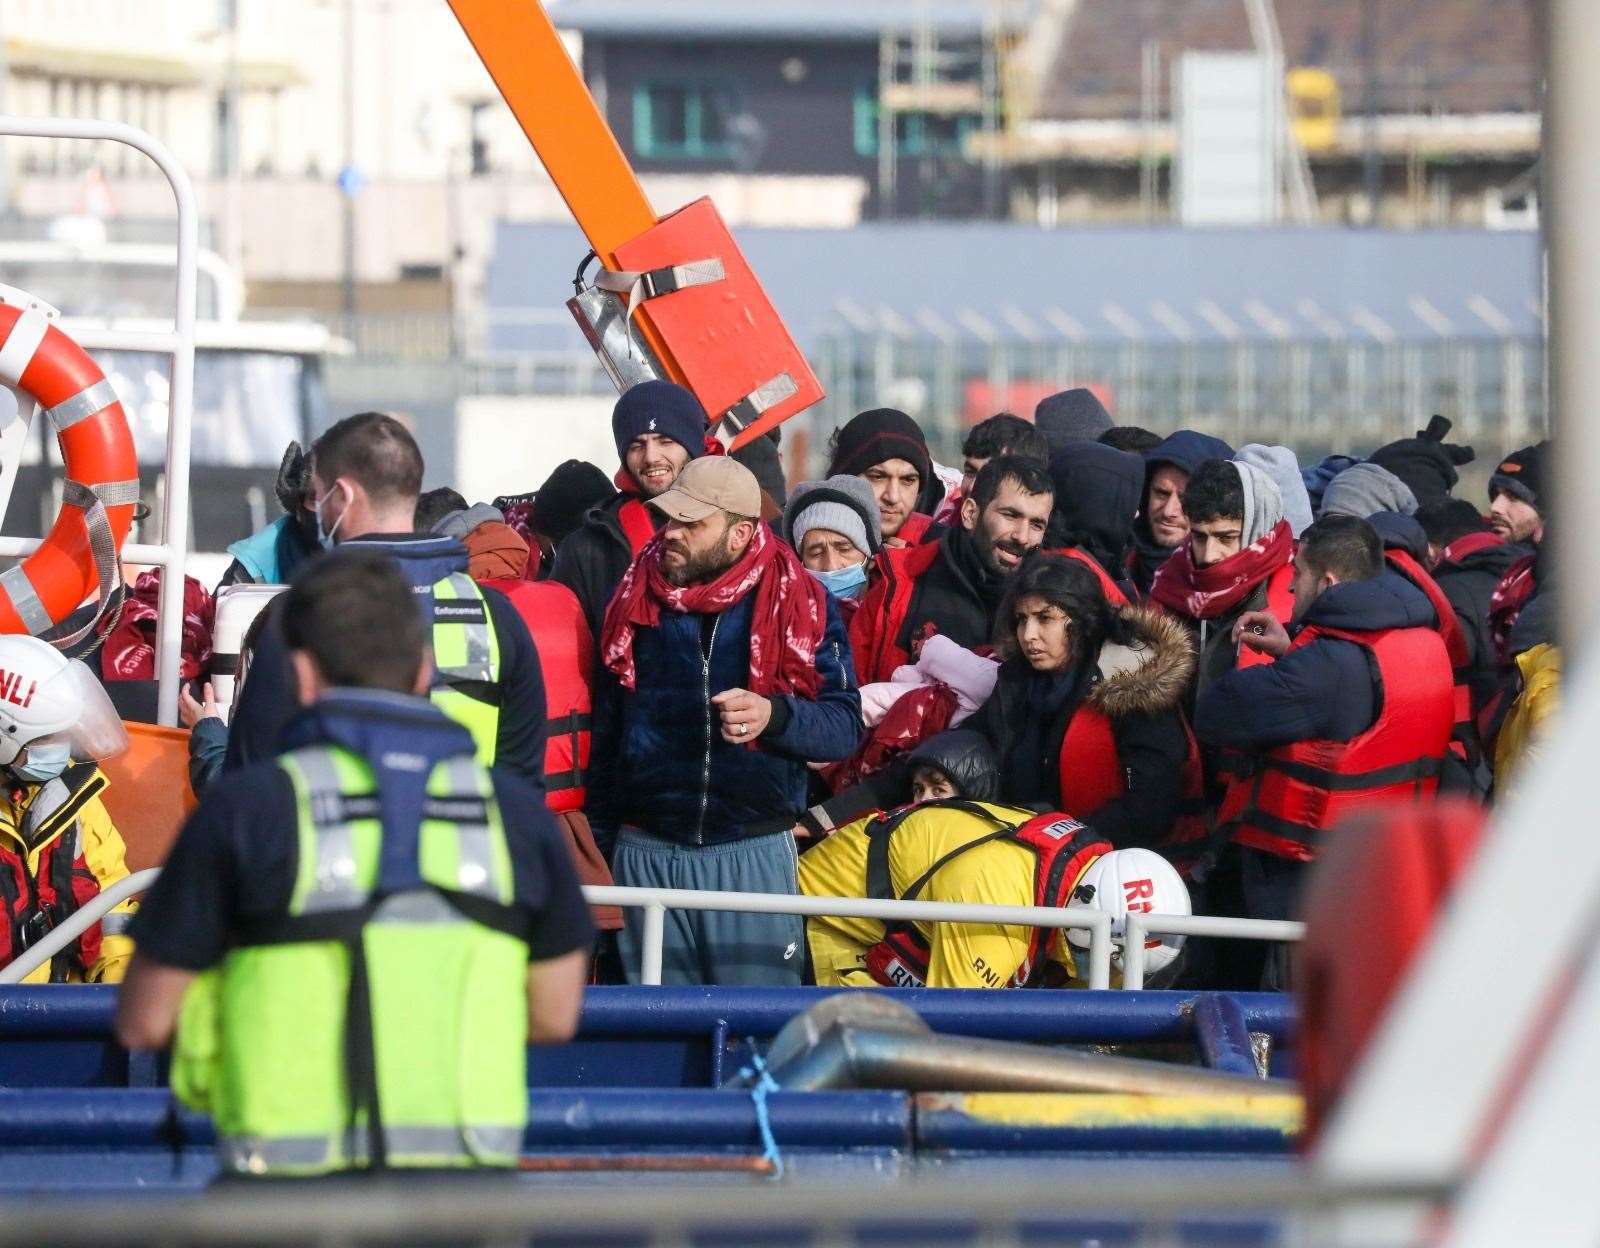 Asylum seekers at the Tug Haven. Picture: UKNIP